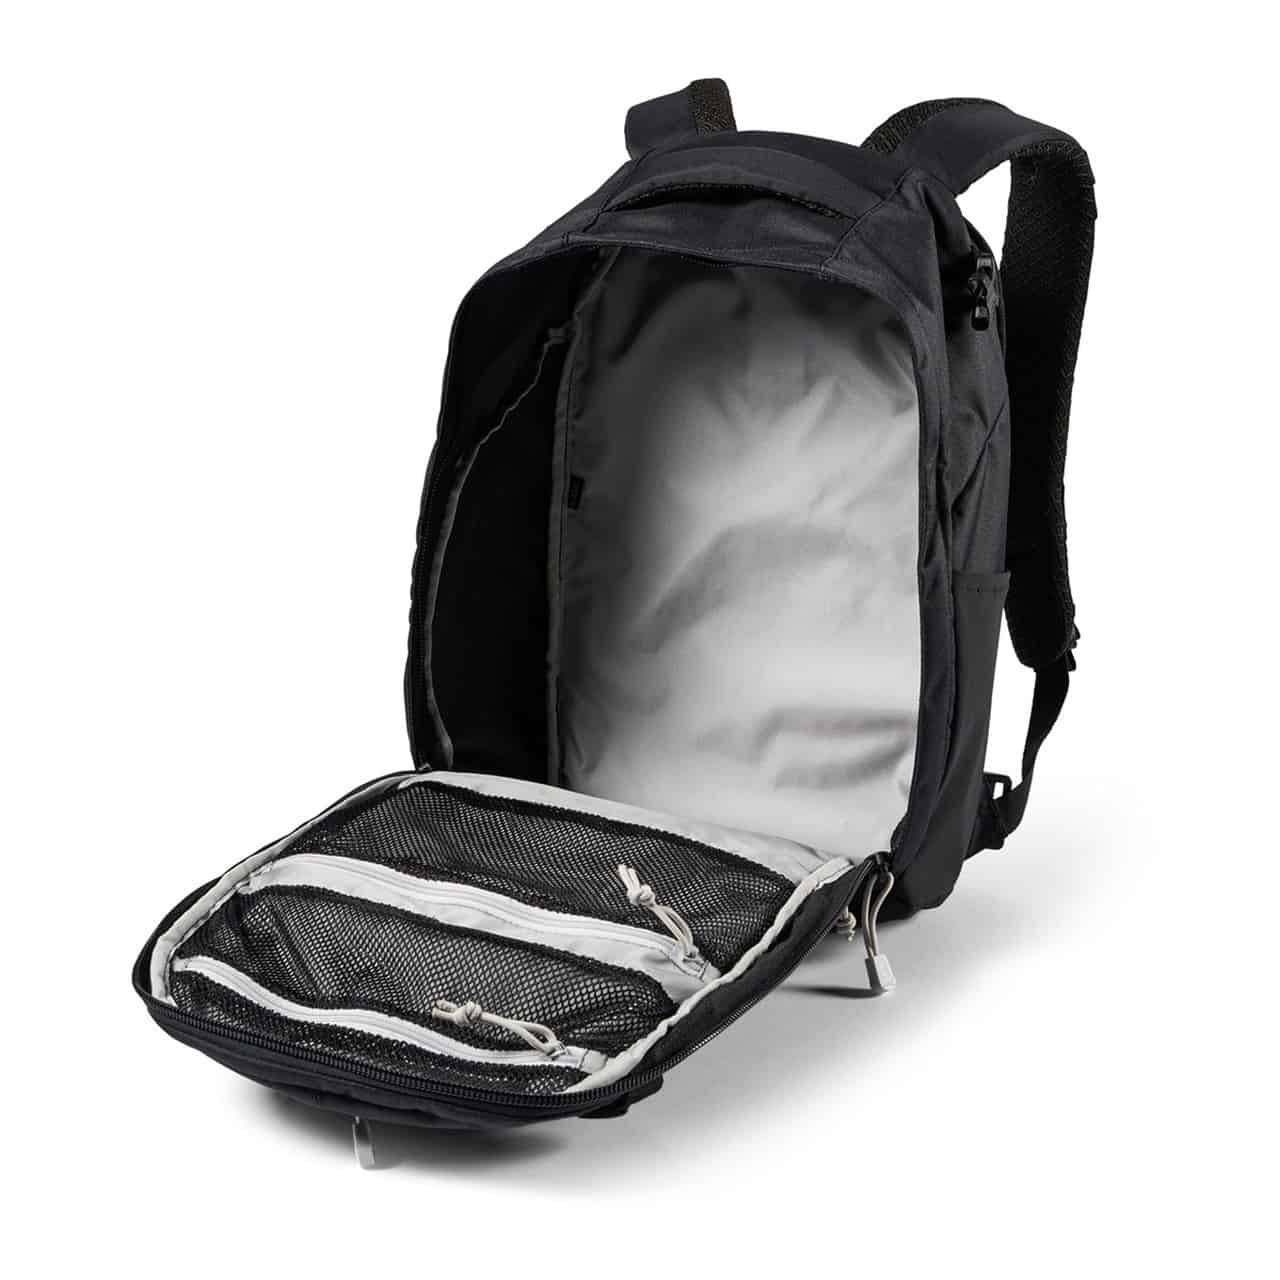 5.11 Covrt 18 - A Covert Backpack with 18 Hours Worth of Storage 